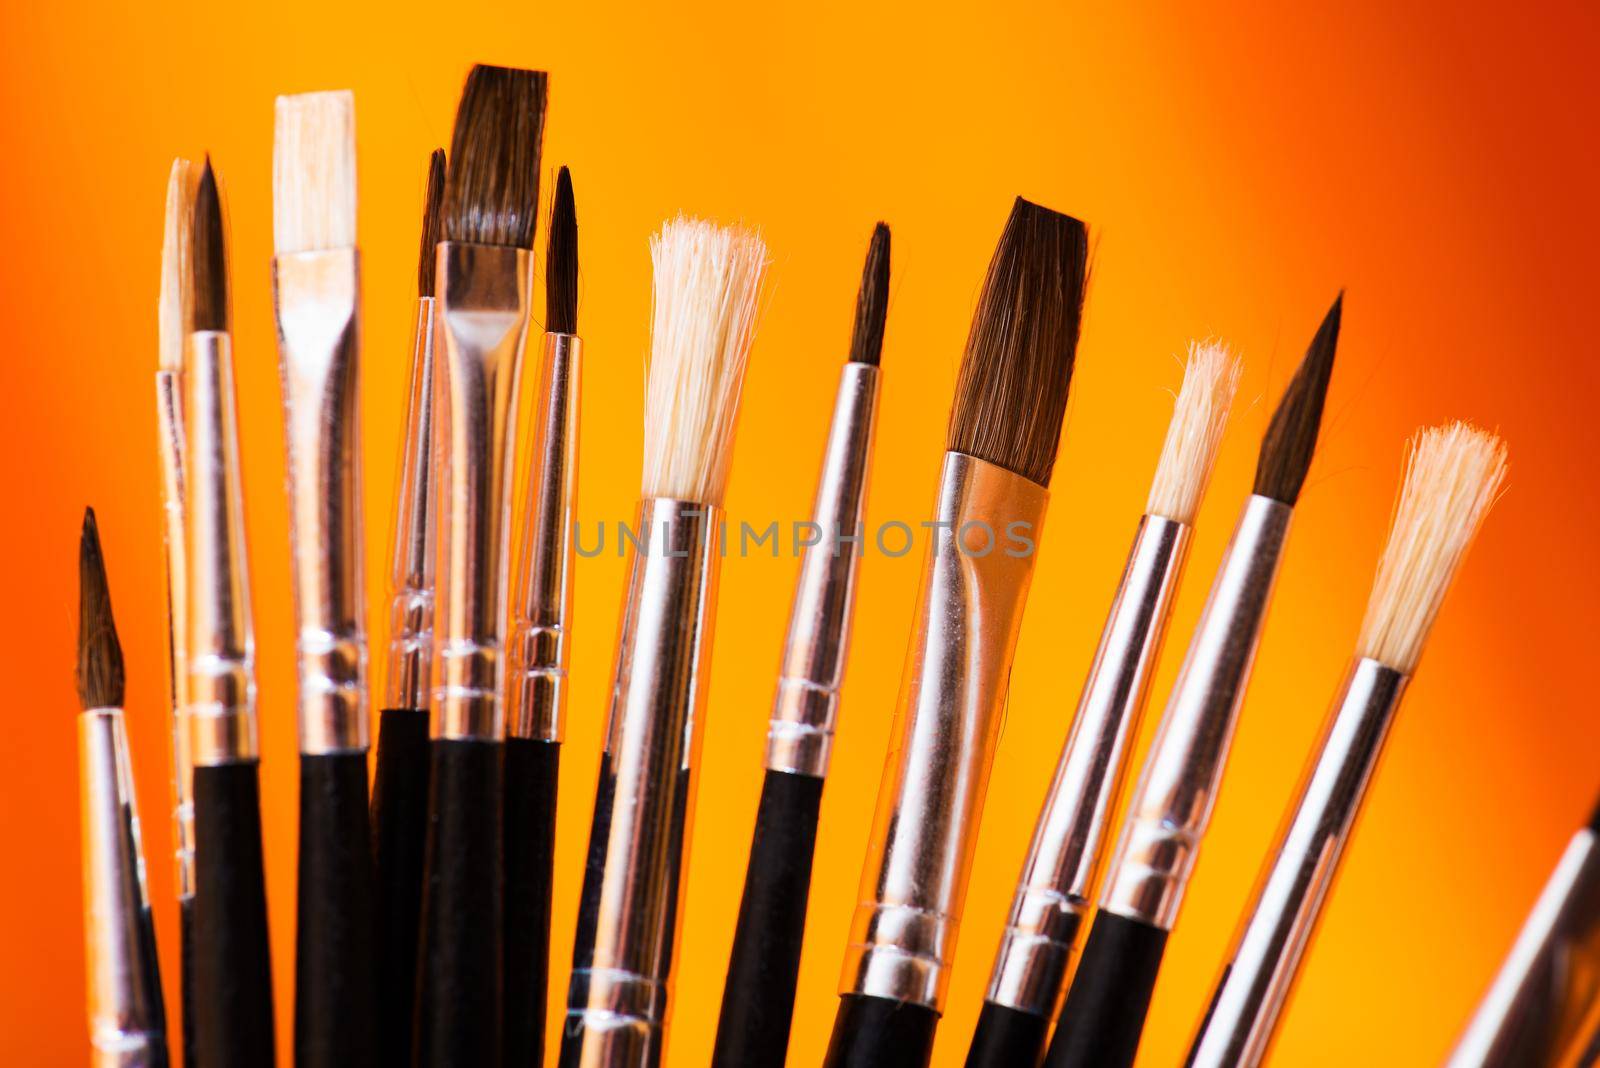 The Right Paintbrush. Many Types of Synthetic Paintbrushes on Orange-Red Background. Paintbrushes Closeup Photo.